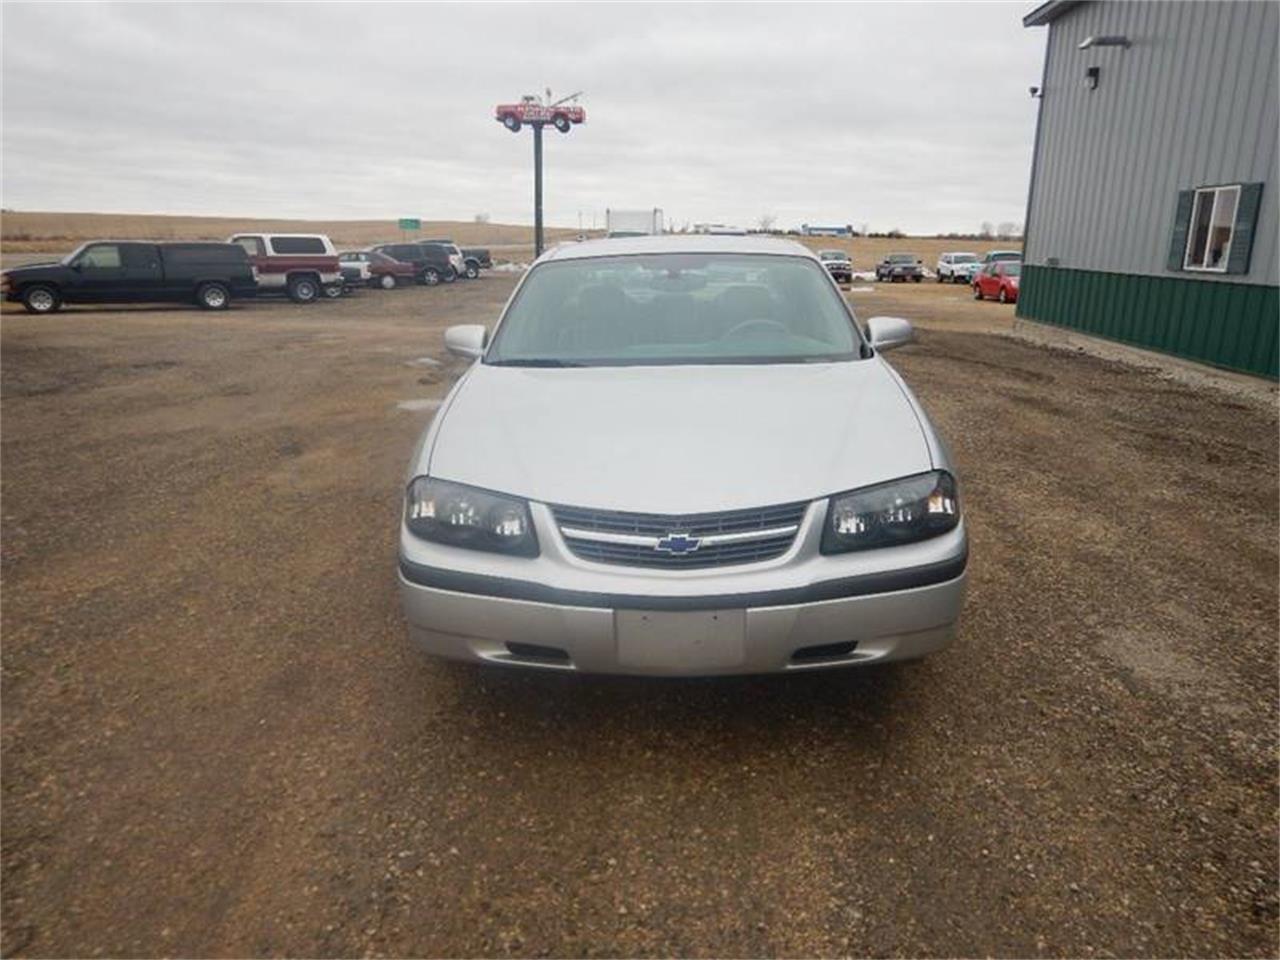 2004 Chevrolet Impala for sale in Clarence, IA